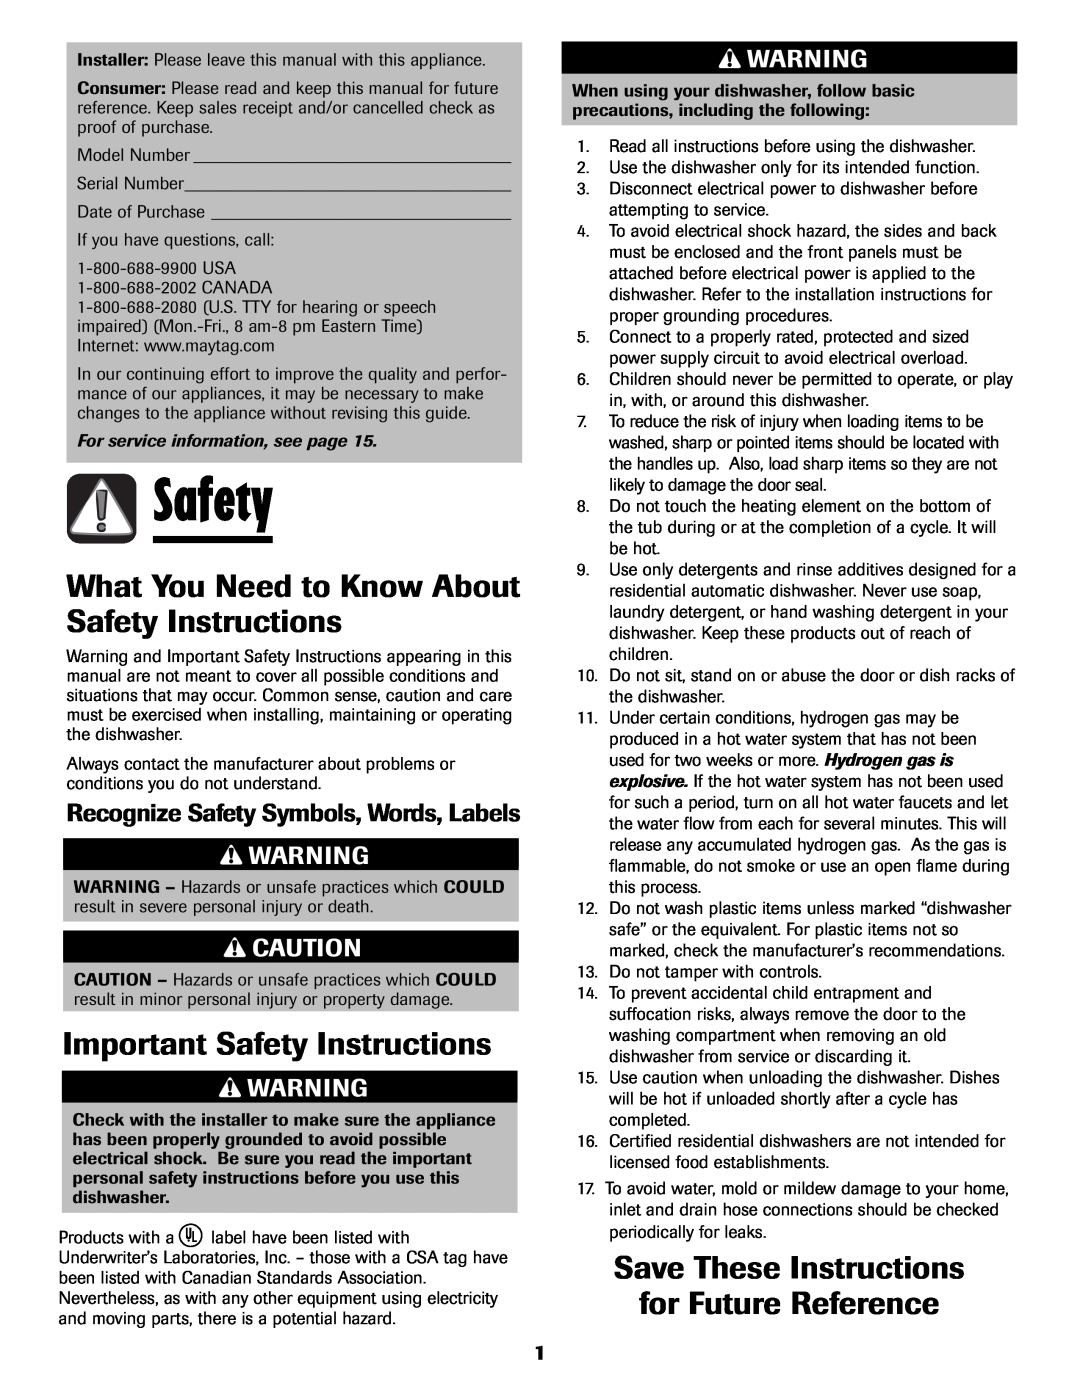 Maytag 6919559A warranty What You Need to Know About Safety Instructions, Important Safety Instructions 